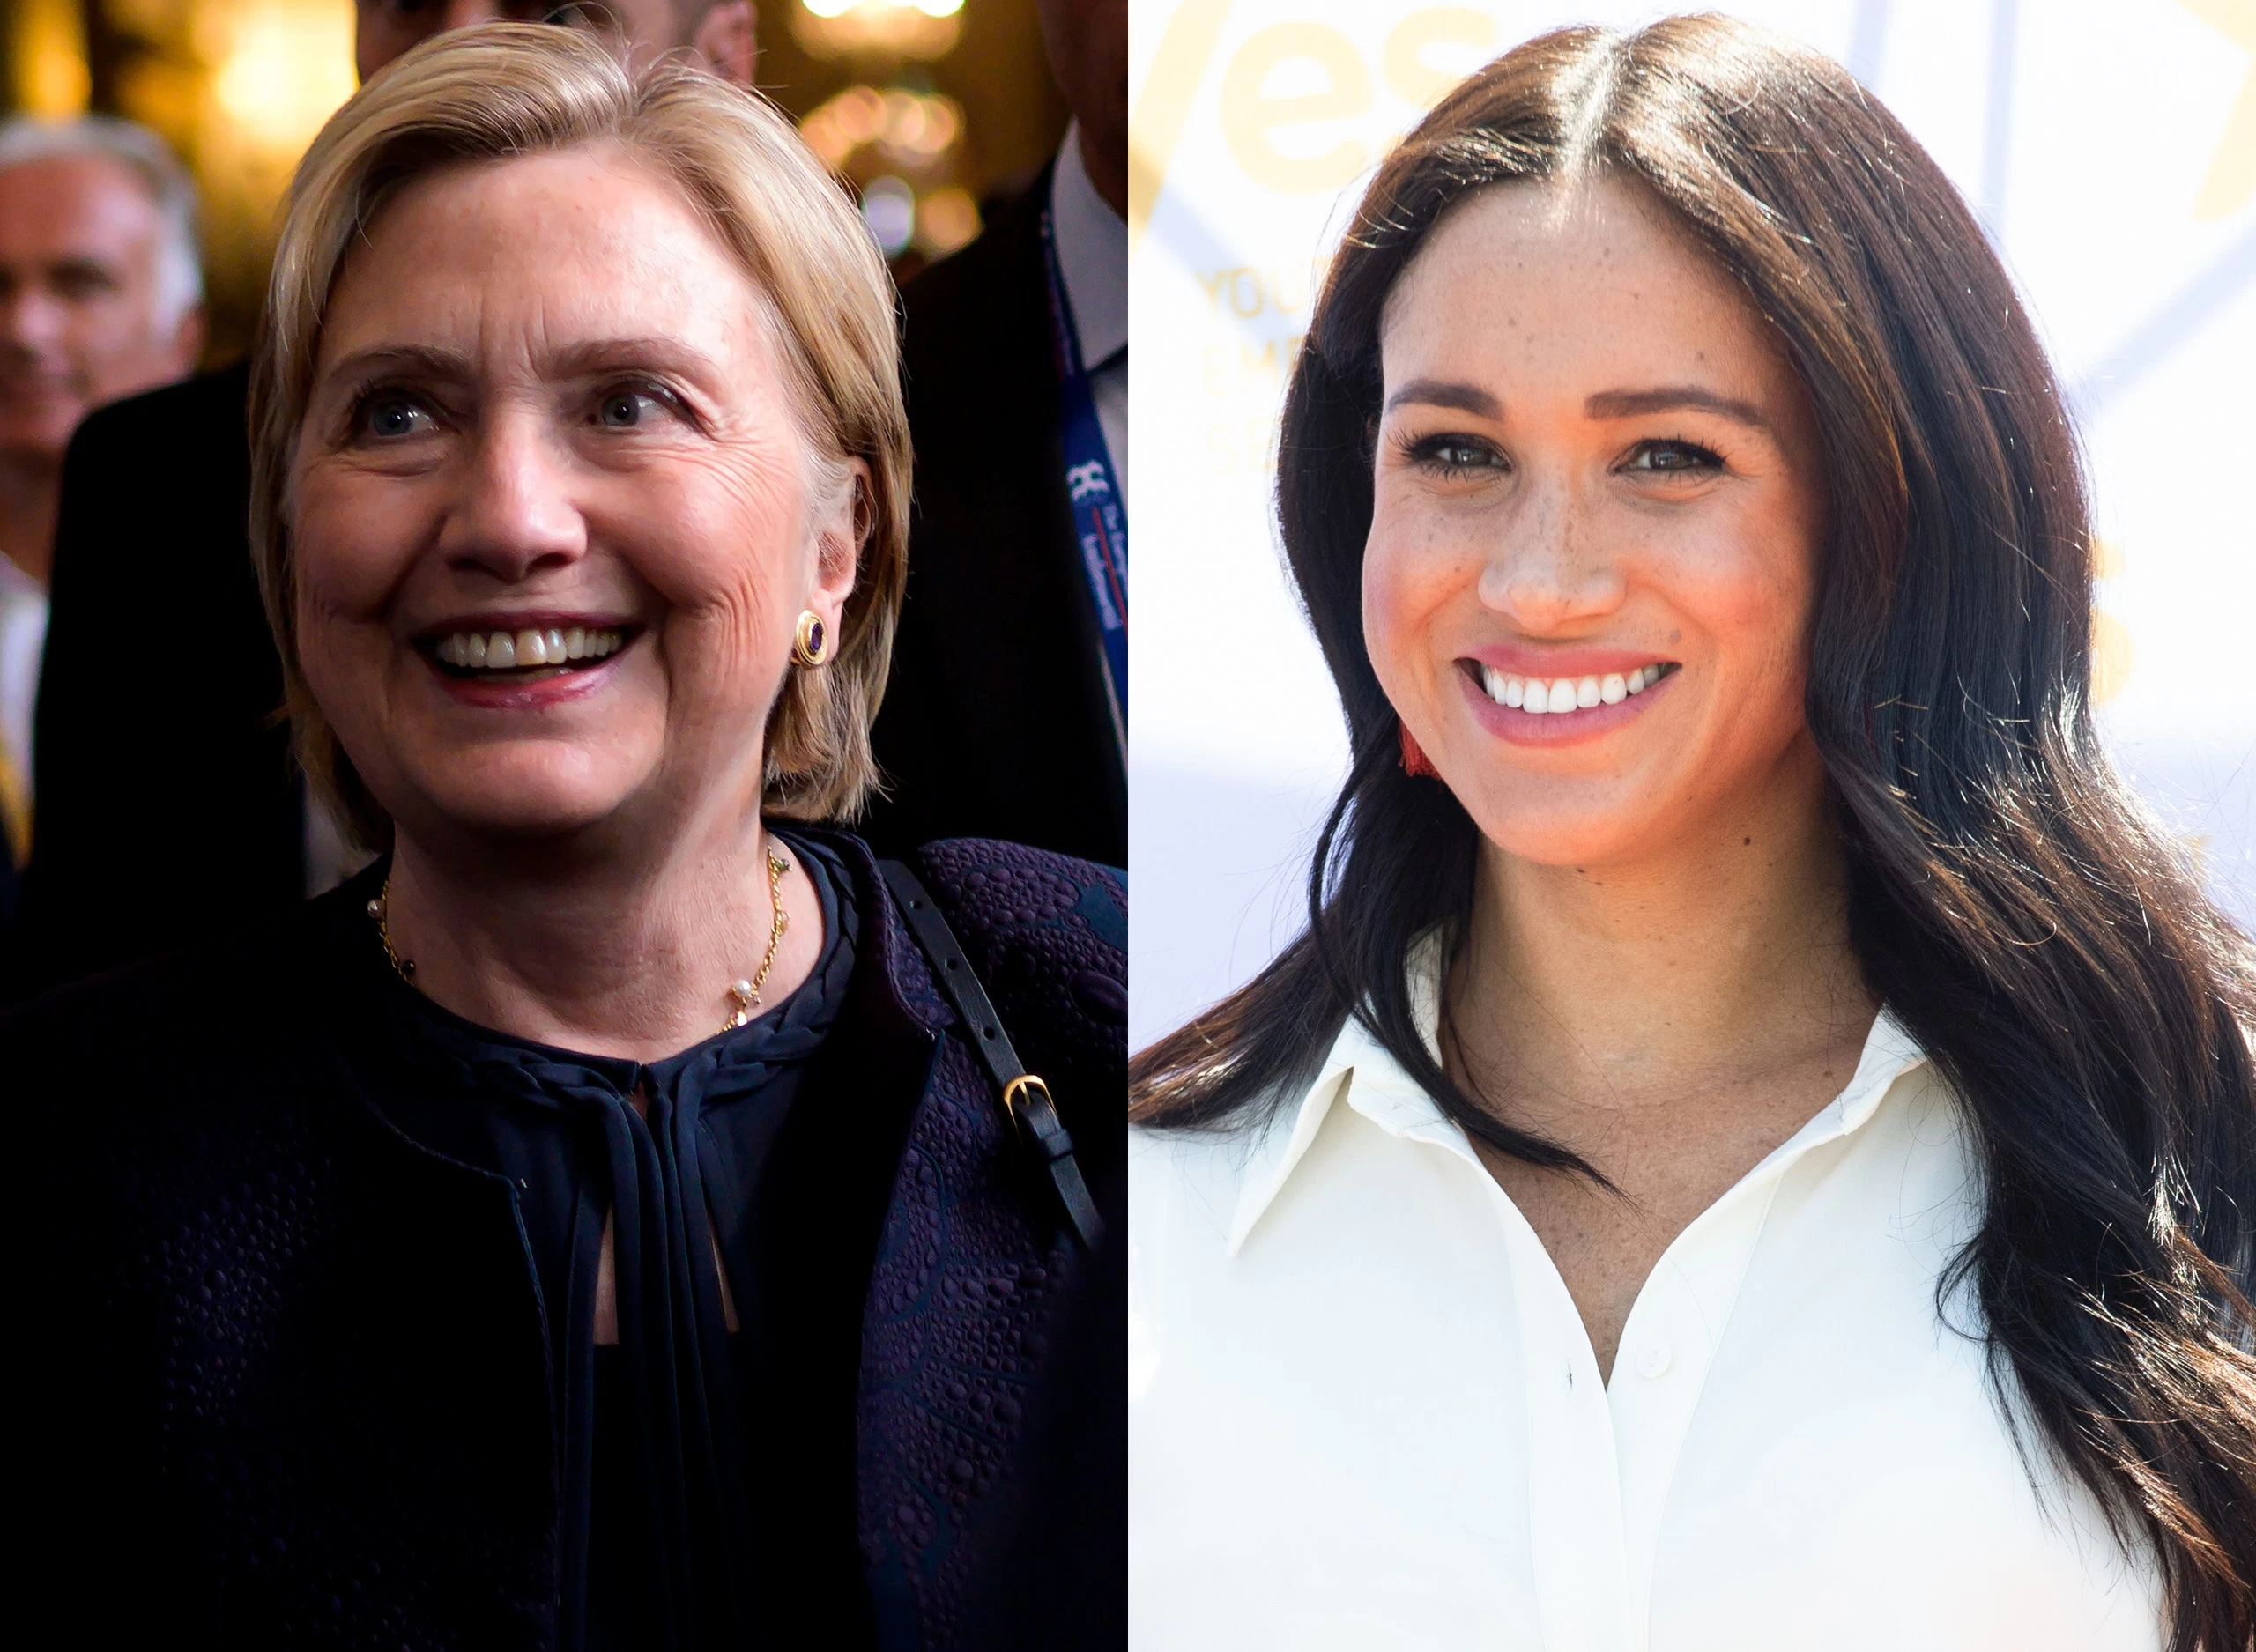 Hillary Clinton comes forward in support of Meghan Markle